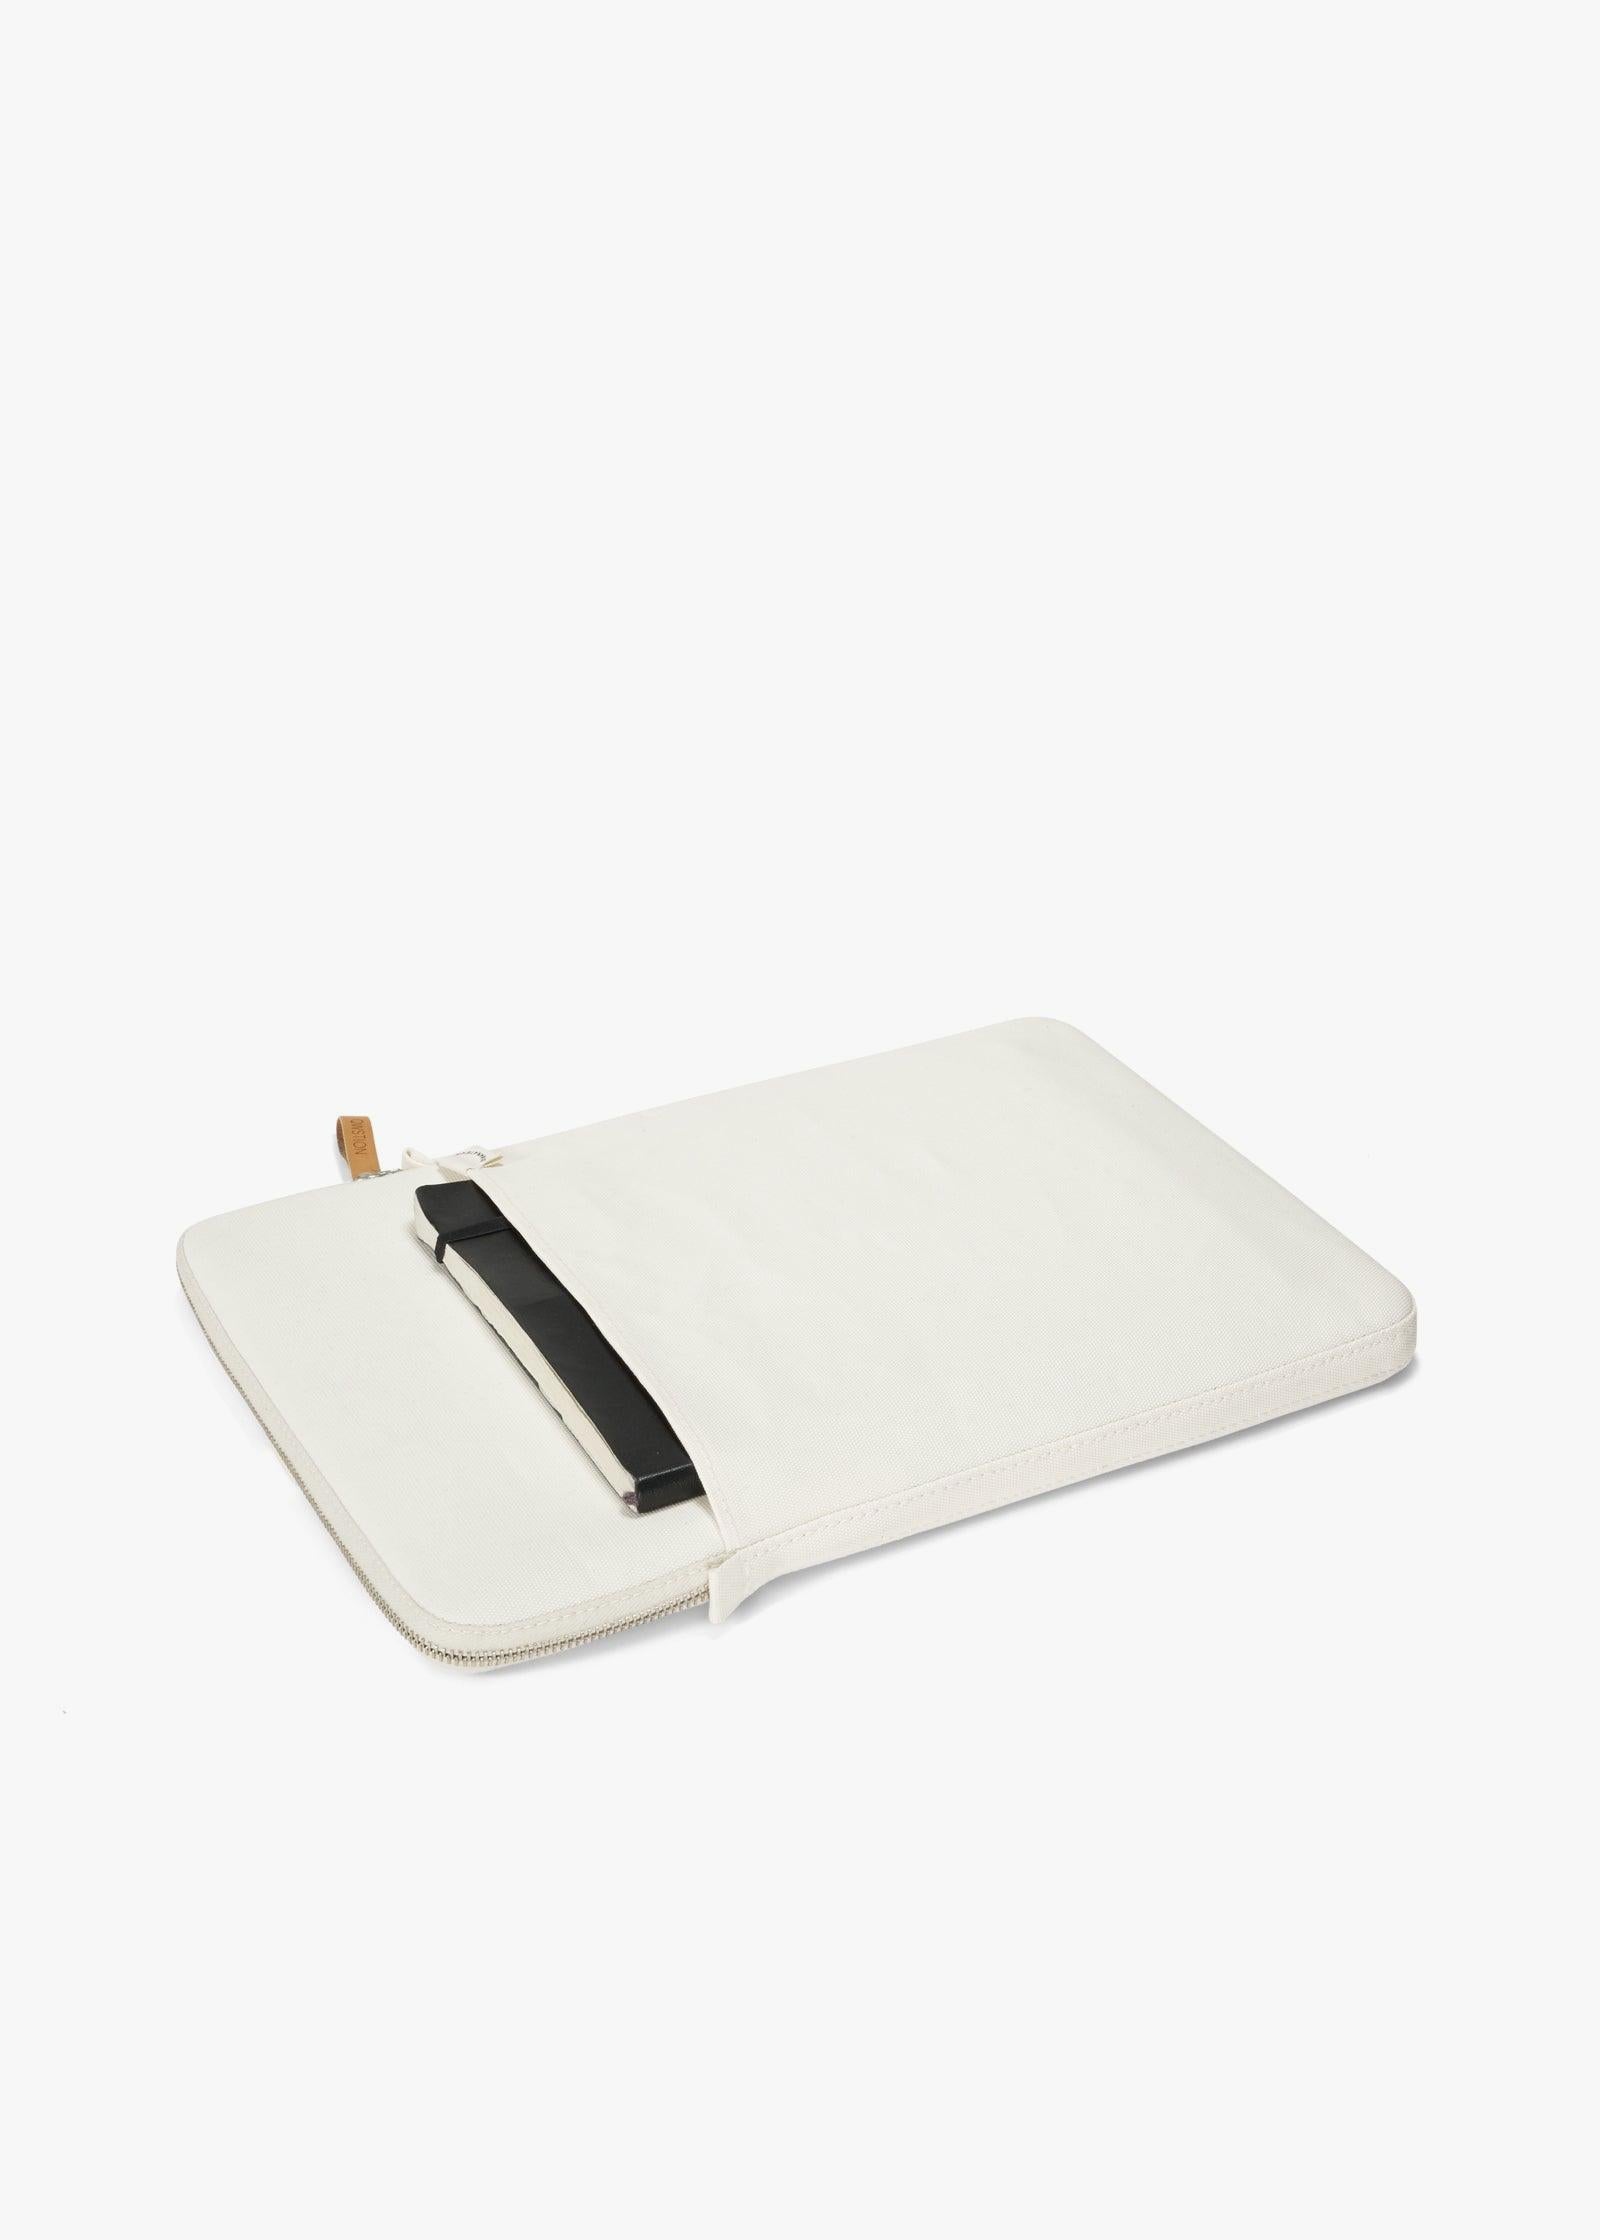 Bananatex Sleeve for Macbook 16" – Natural White - QWSTION